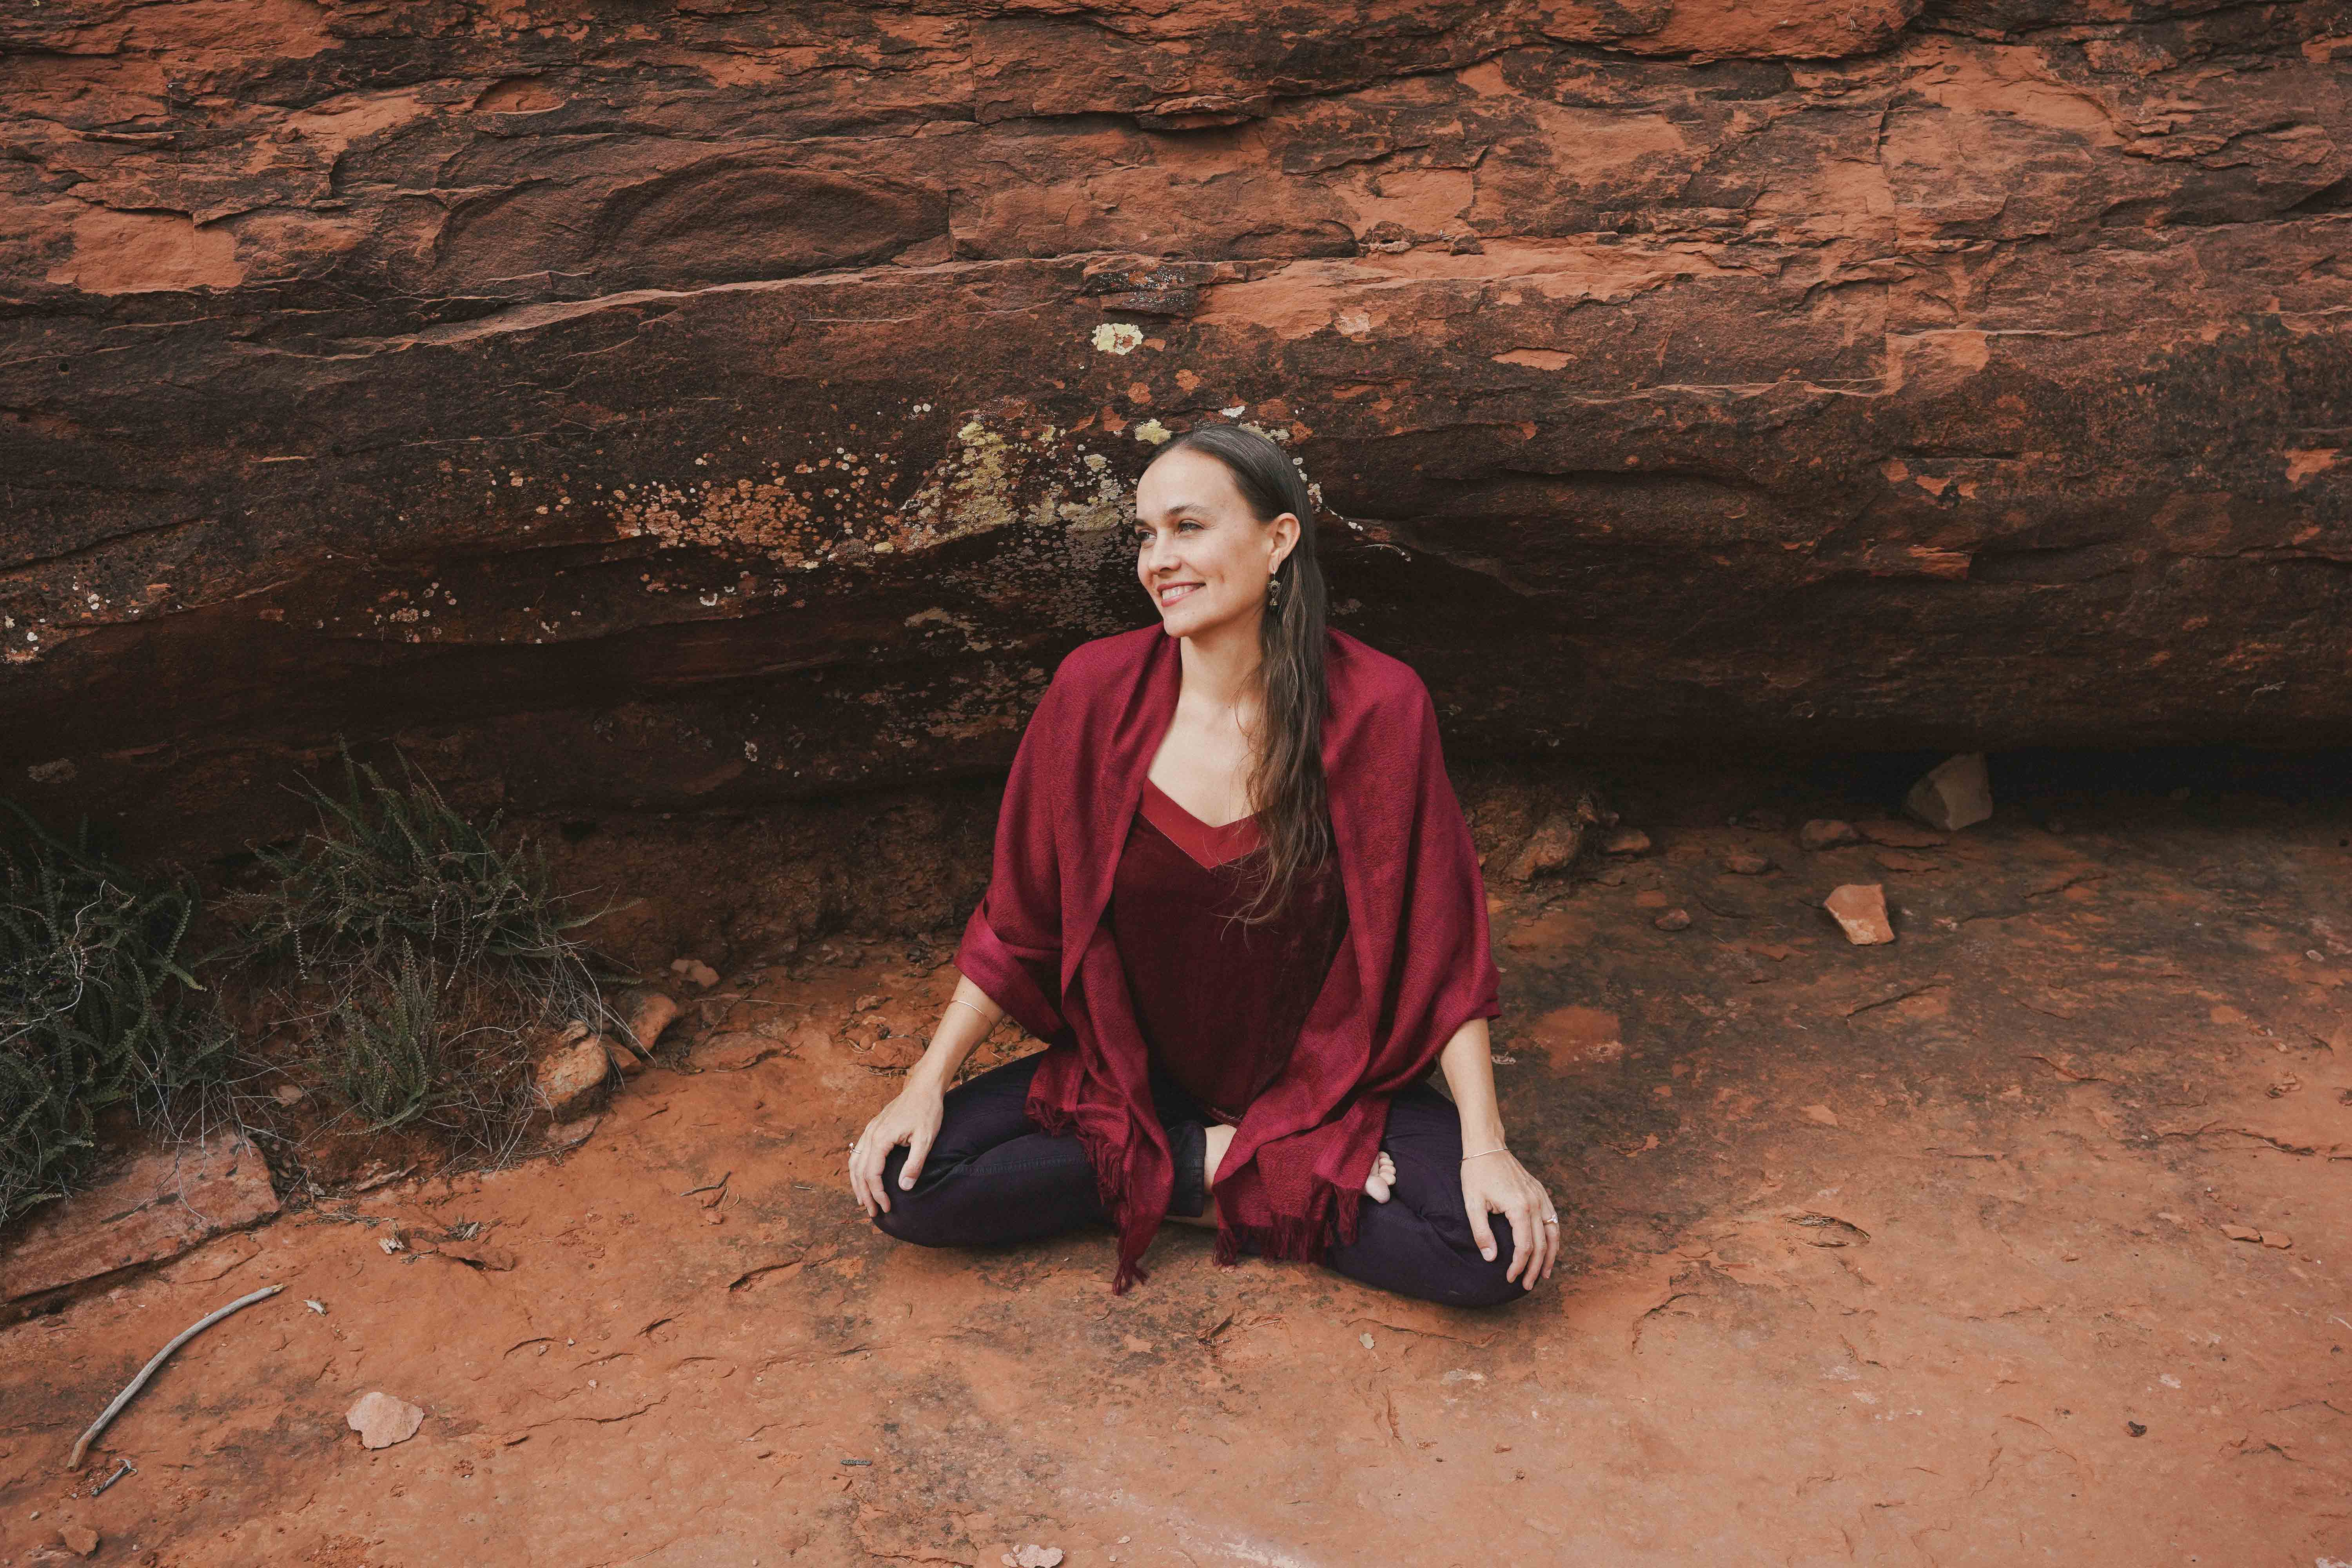 Katie Hess, founder of LOTUSWEI, sitting and smiling amidst red desert rocks.